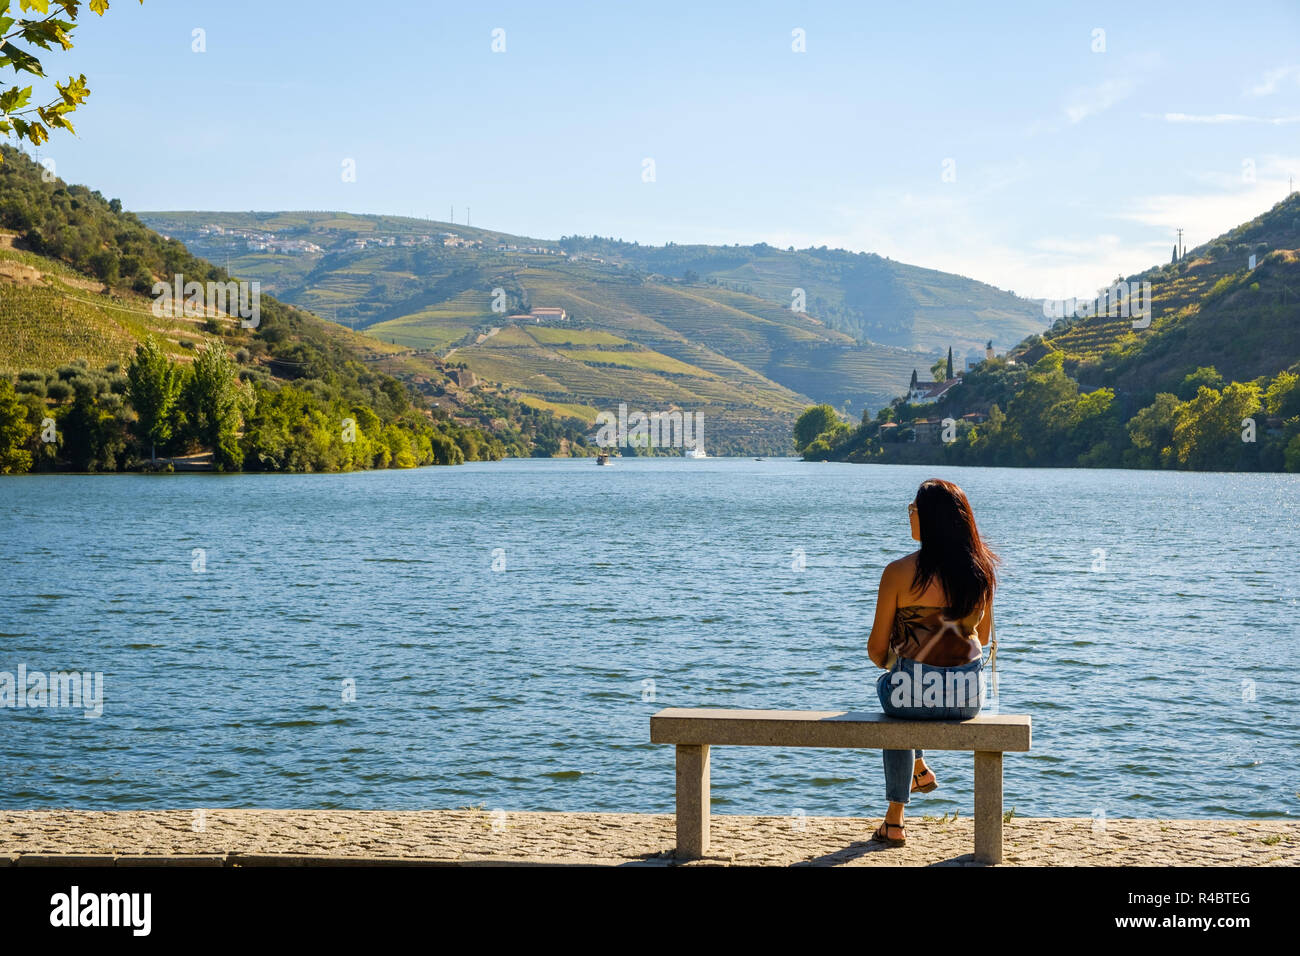 Pinhao, Portugal - October 05, 2018 : Woman admiring the beautiful landscapes on the banks of the Douro River, Vila Real, Portugal Stock Photo